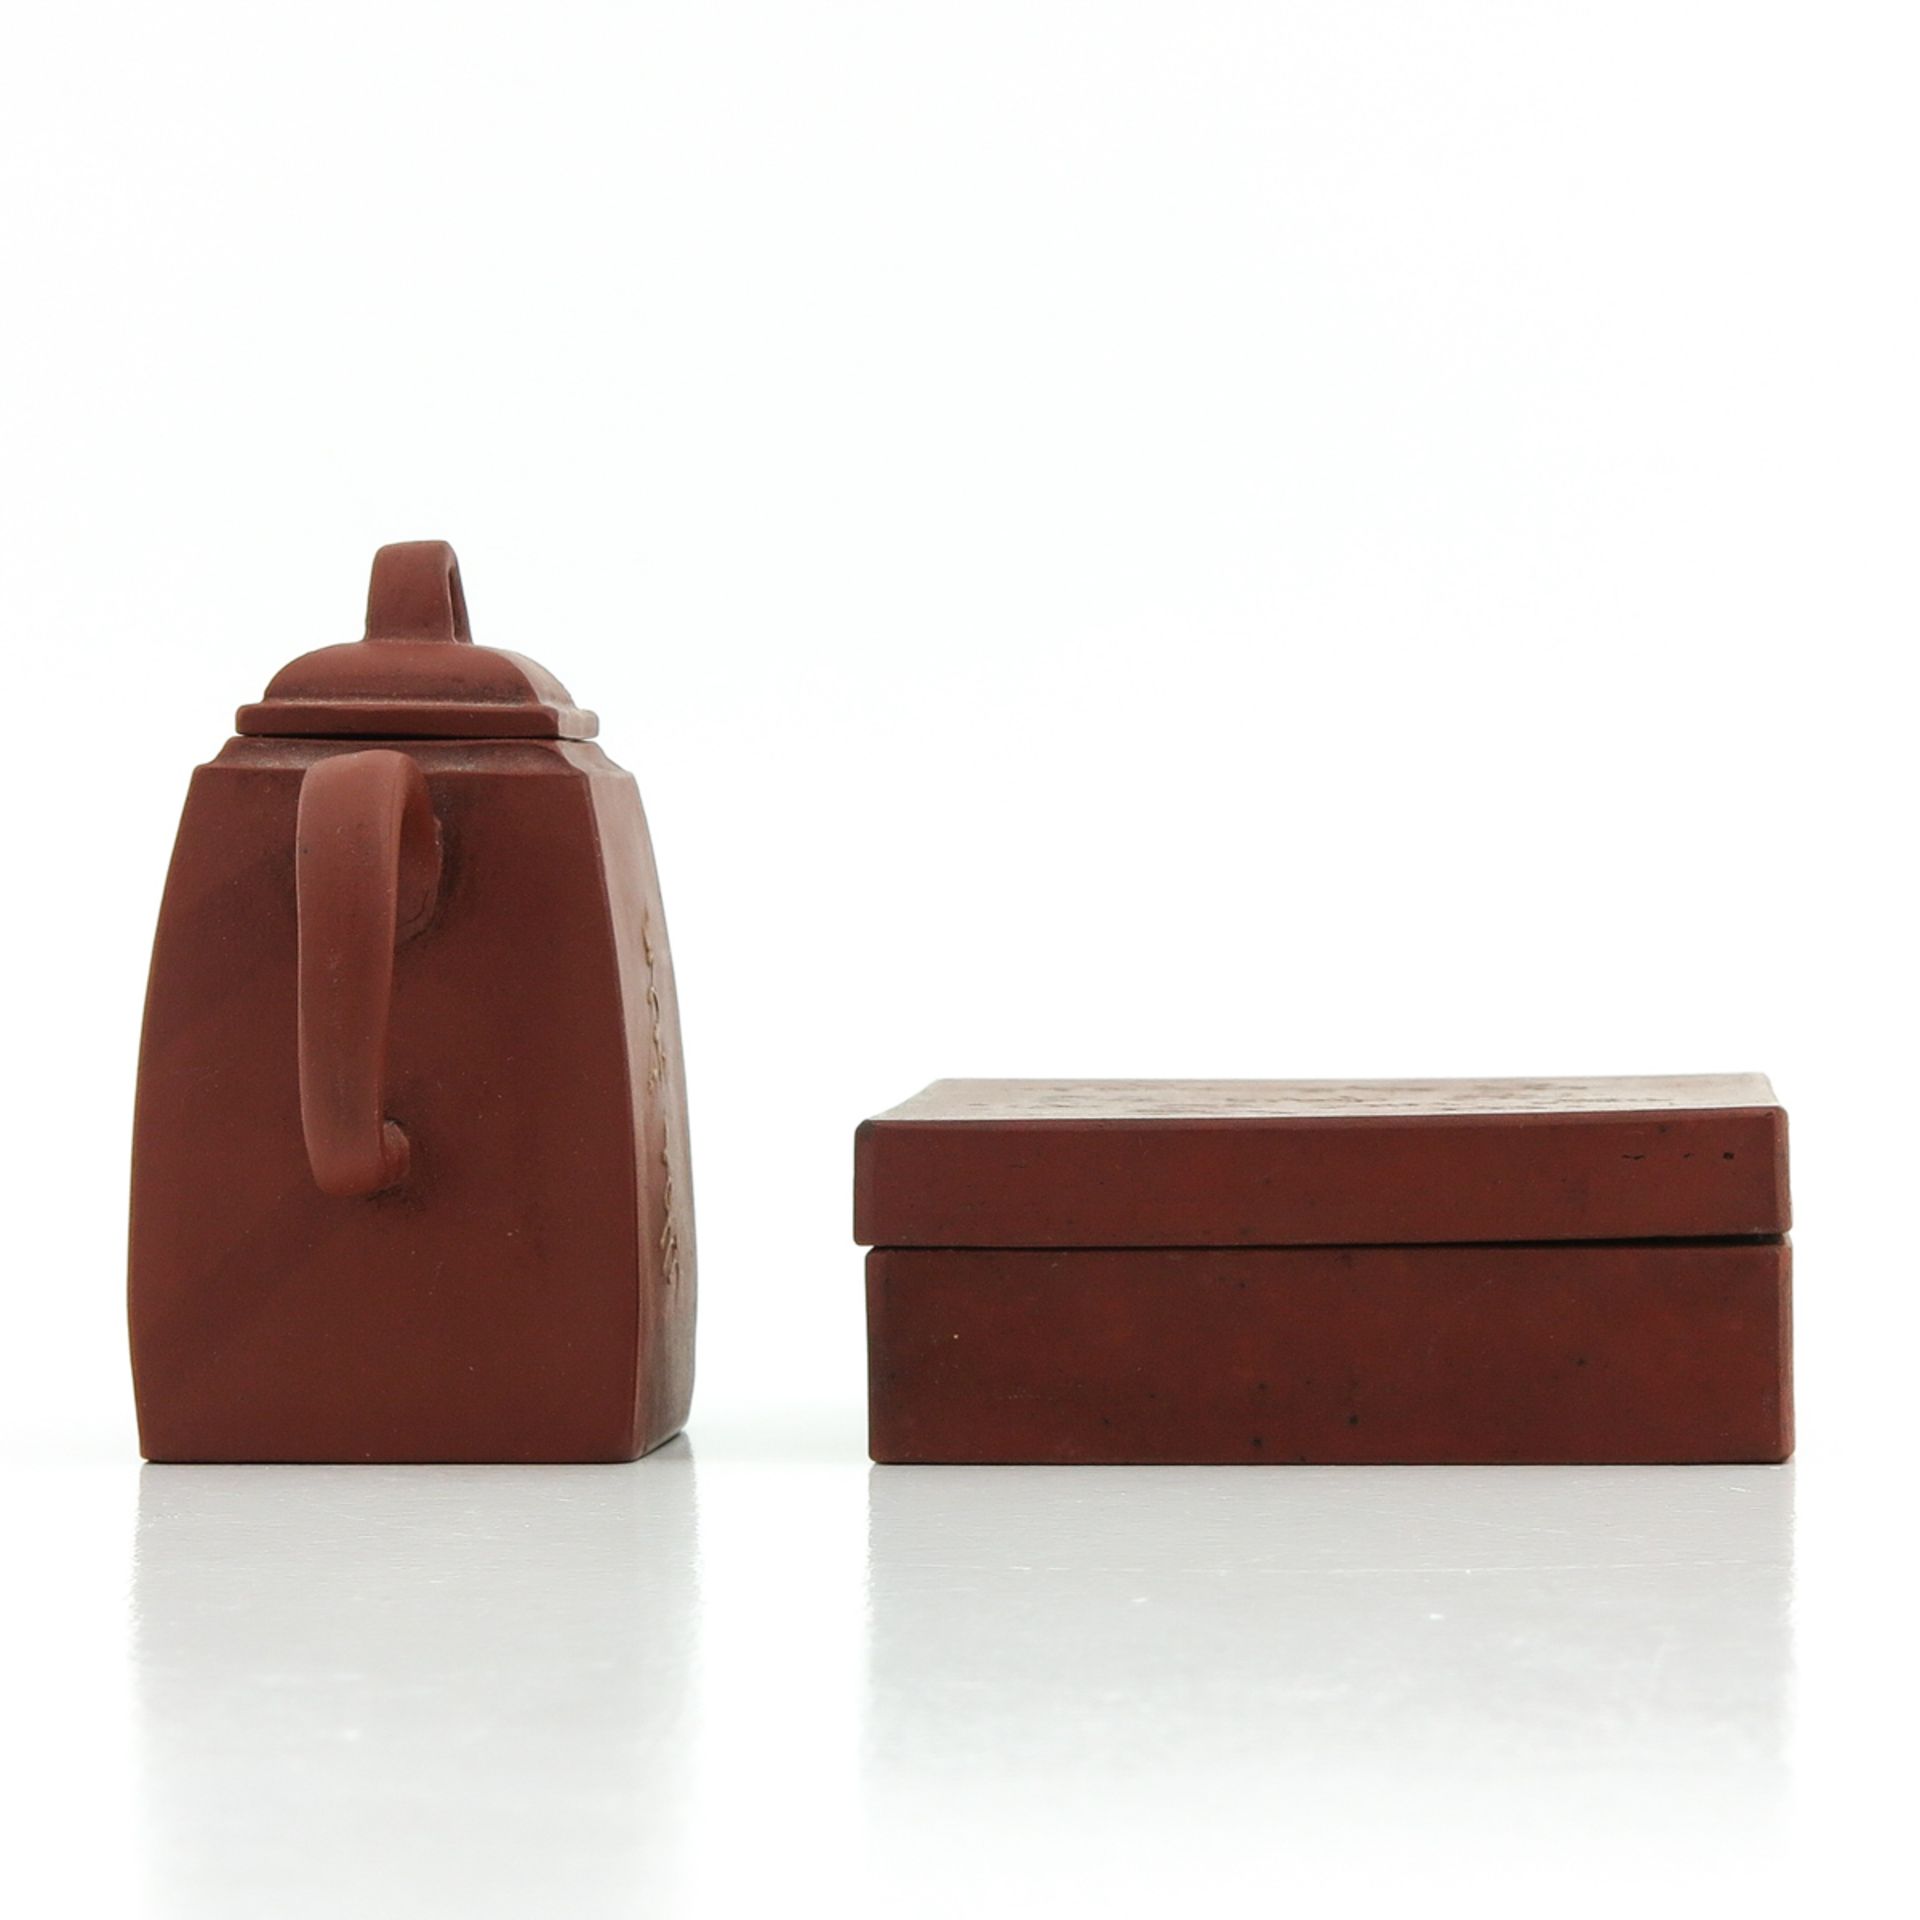 A Yixing Teapot and Box - Image 2 of 10